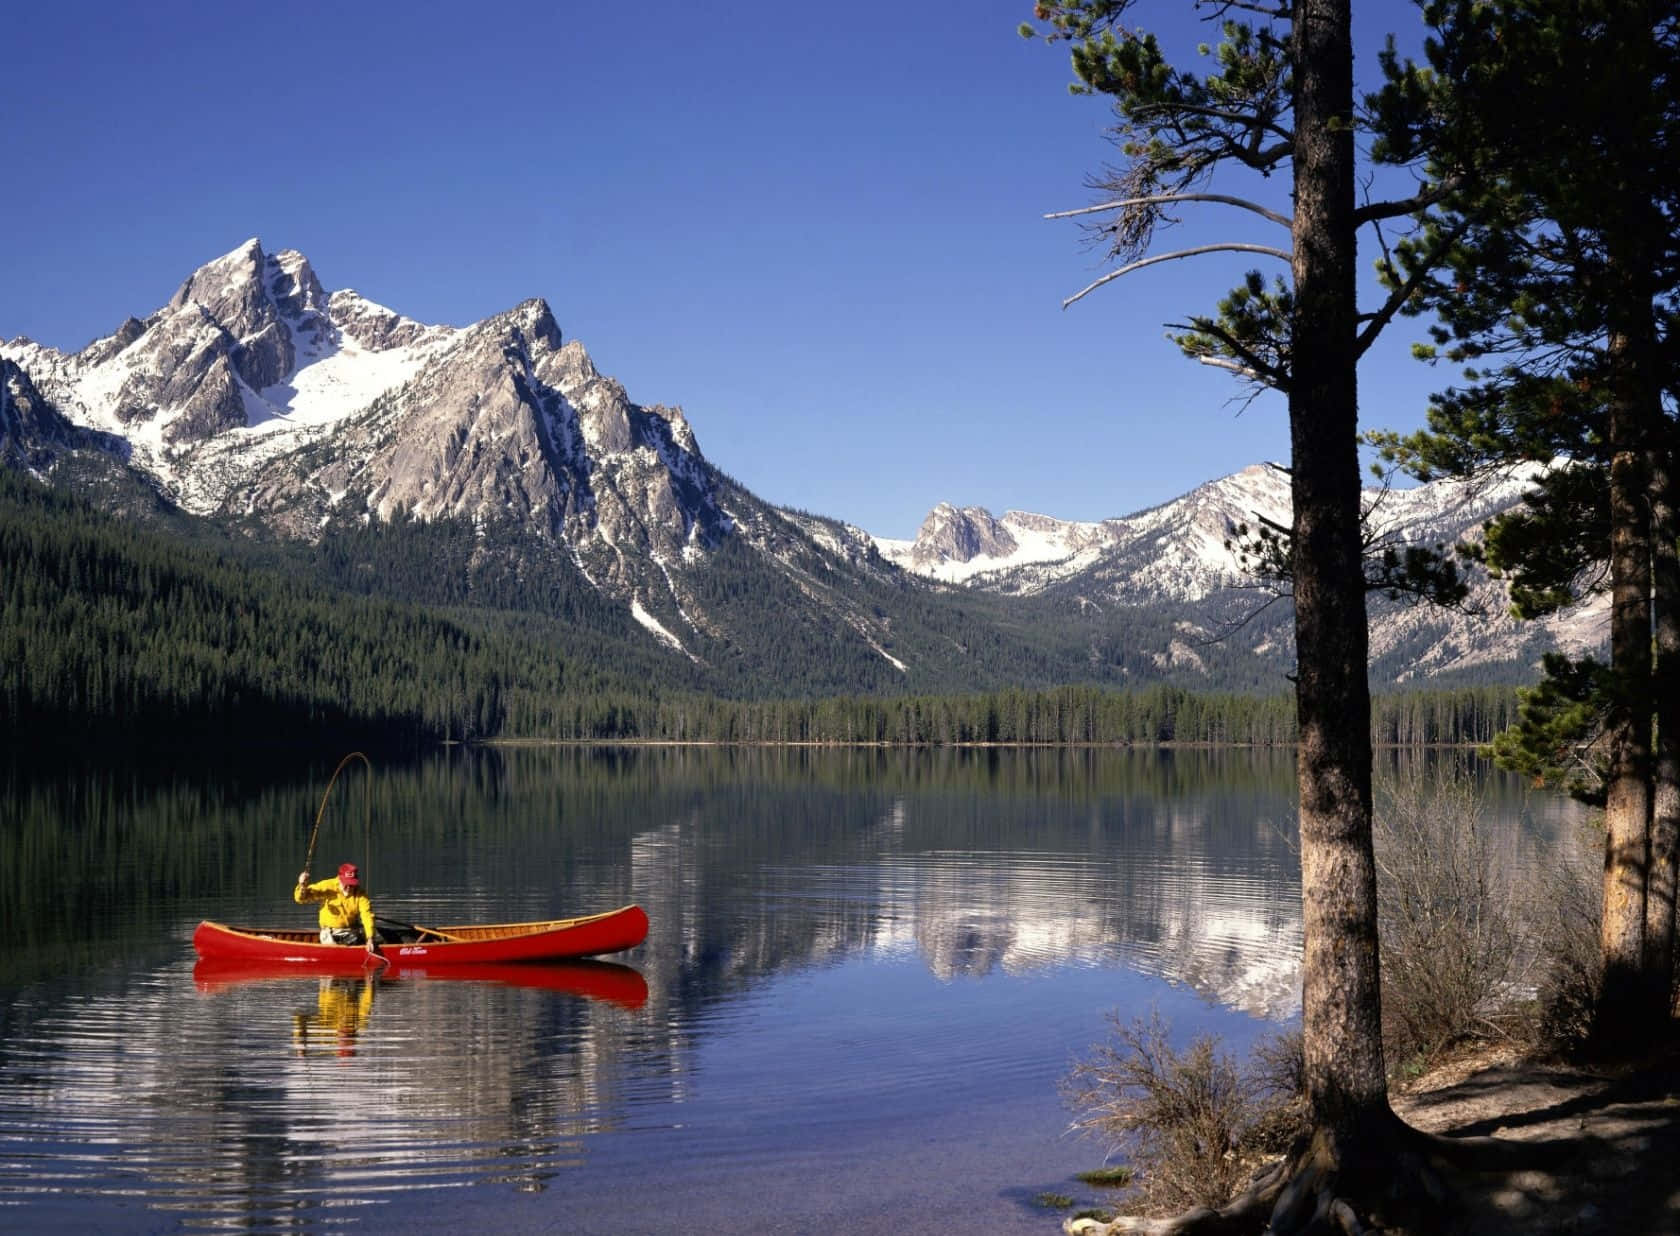 A Man Is Paddling A Red Canoe On A Lake With Mountains In The Background Wallpaper